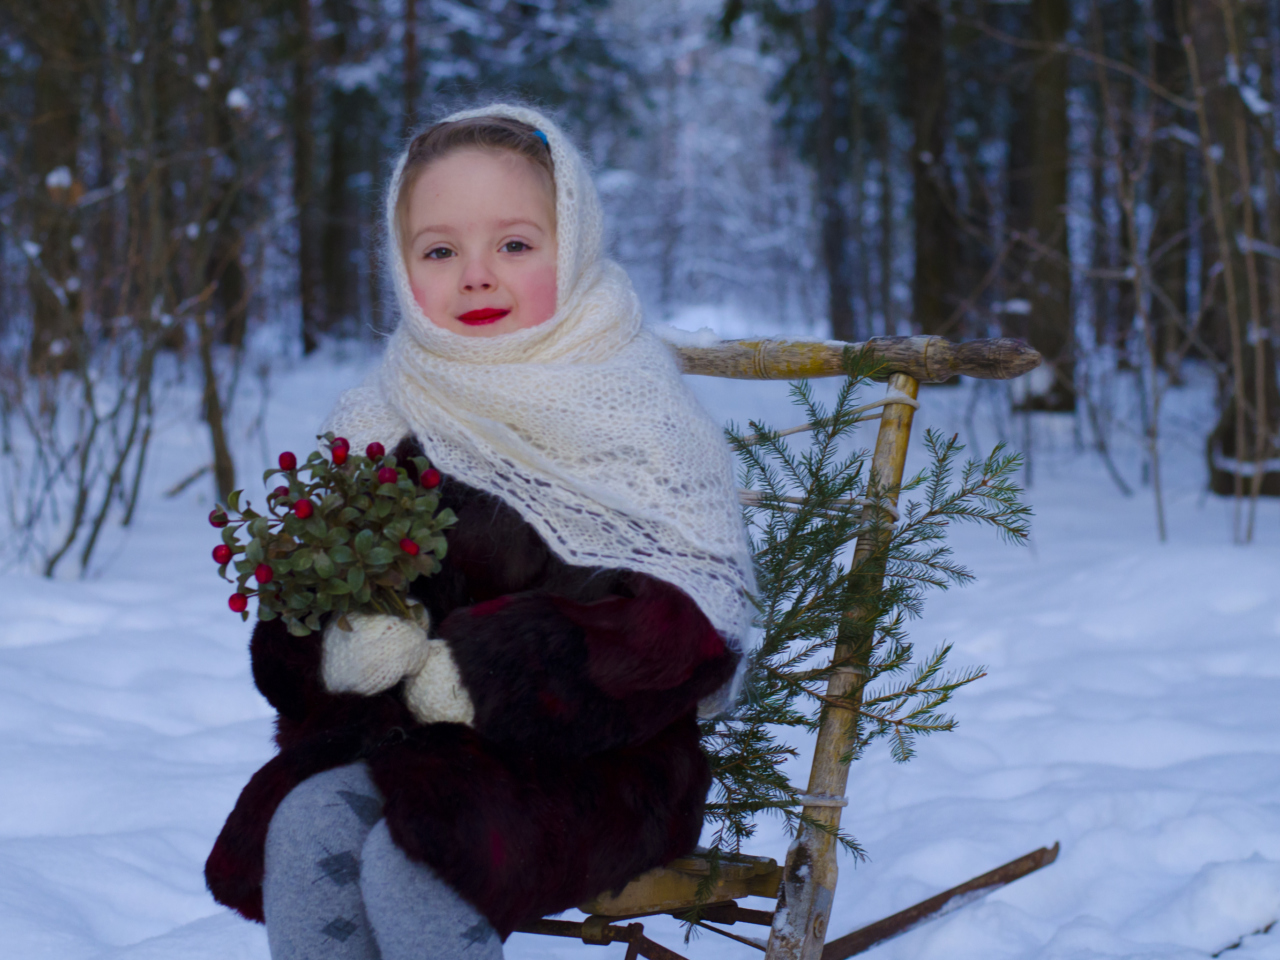 Little Girl In Winter Outfit wallpaper 1280x960